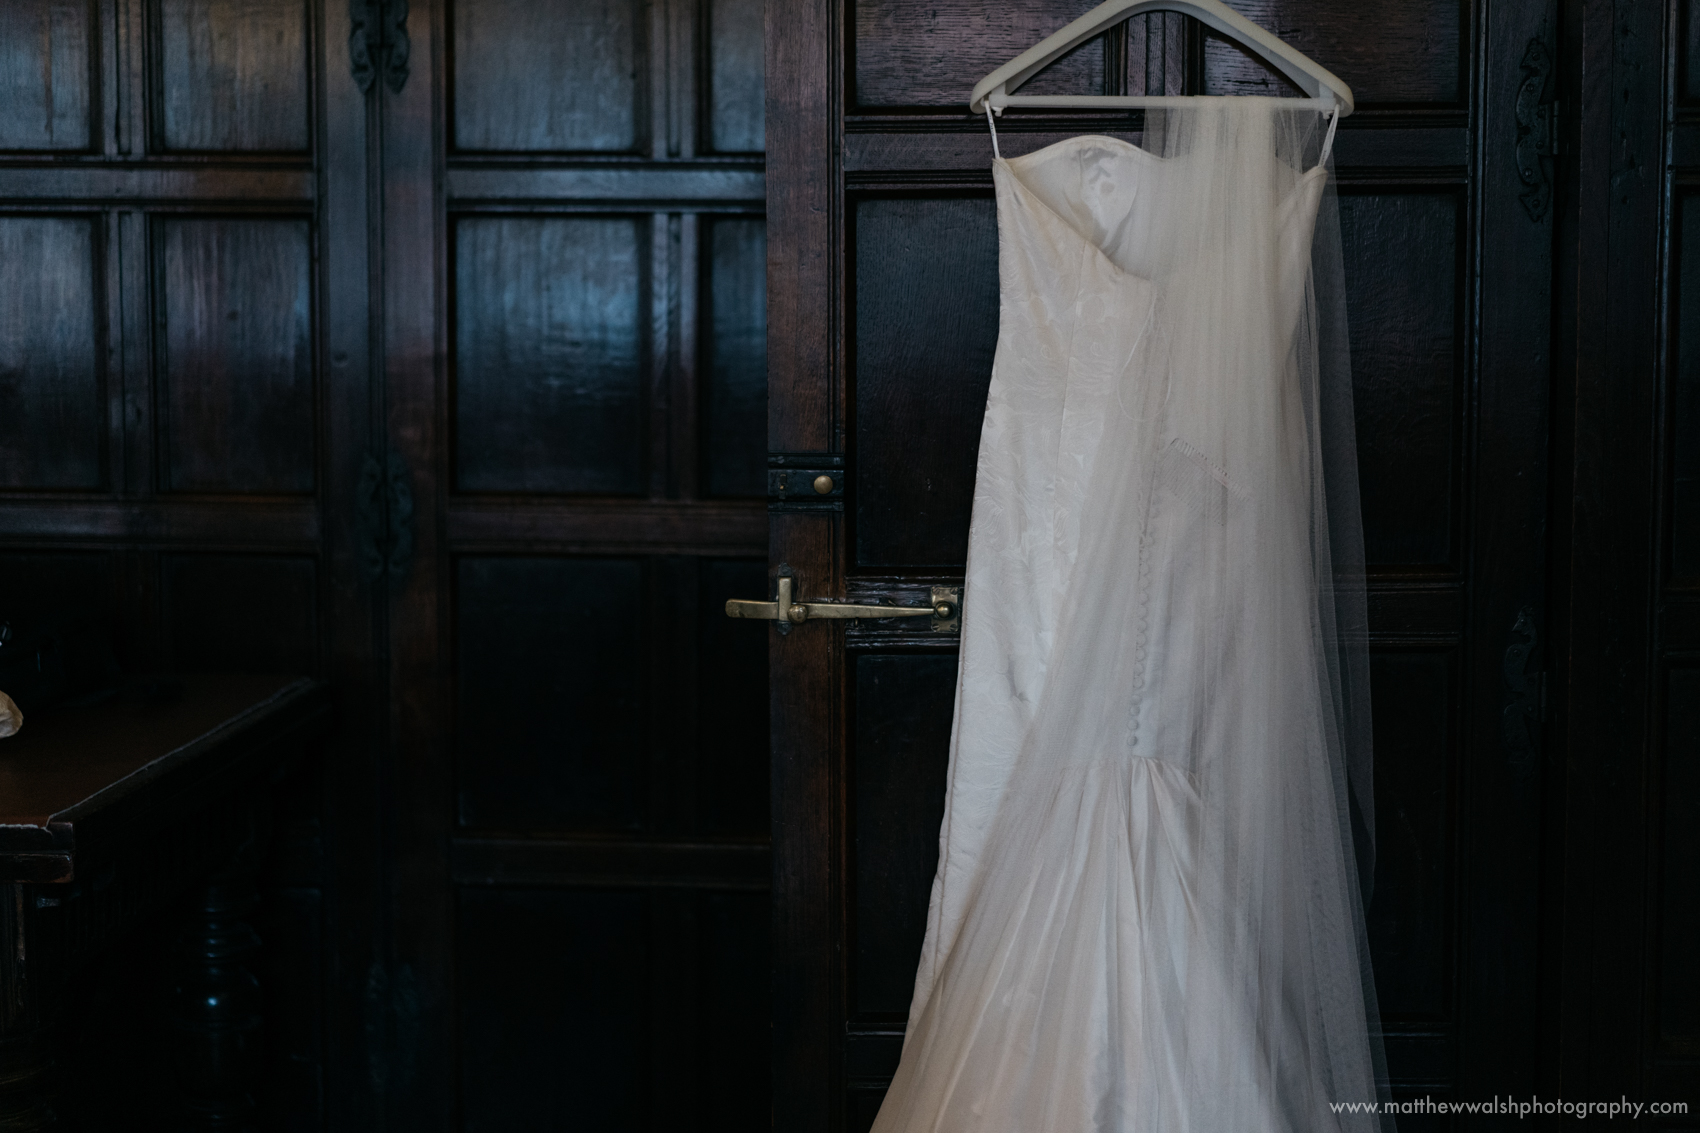 The wedding dress hanging from the door with a backdrop of natural wood panelled walls